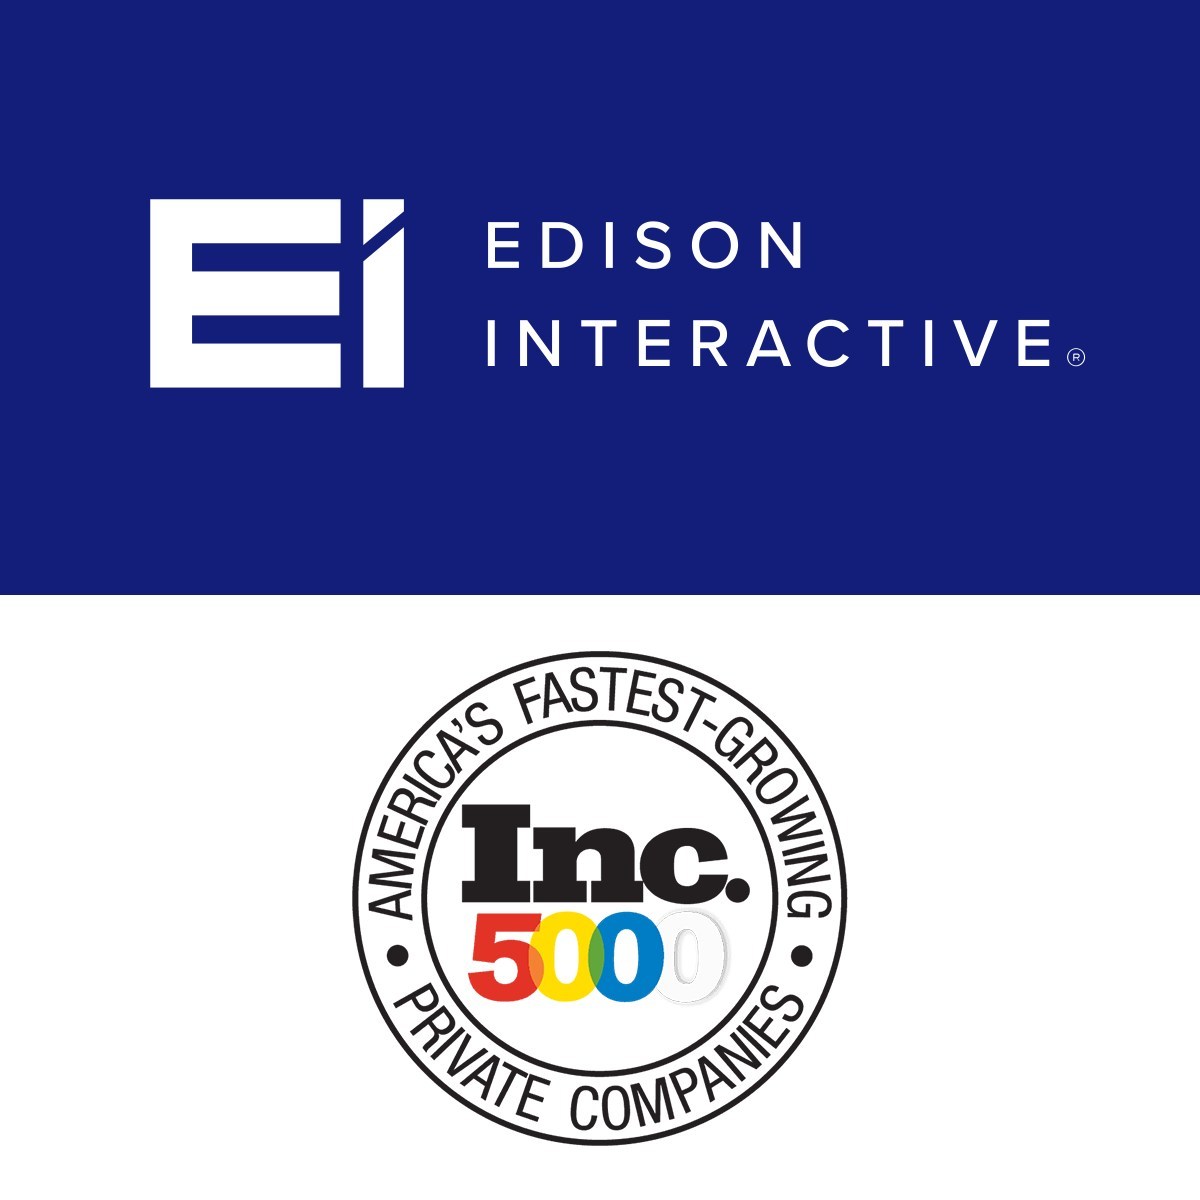 Innovative content-delivery solution Edison Interactive ranks among the nation’s fastest-growing privately held companies.